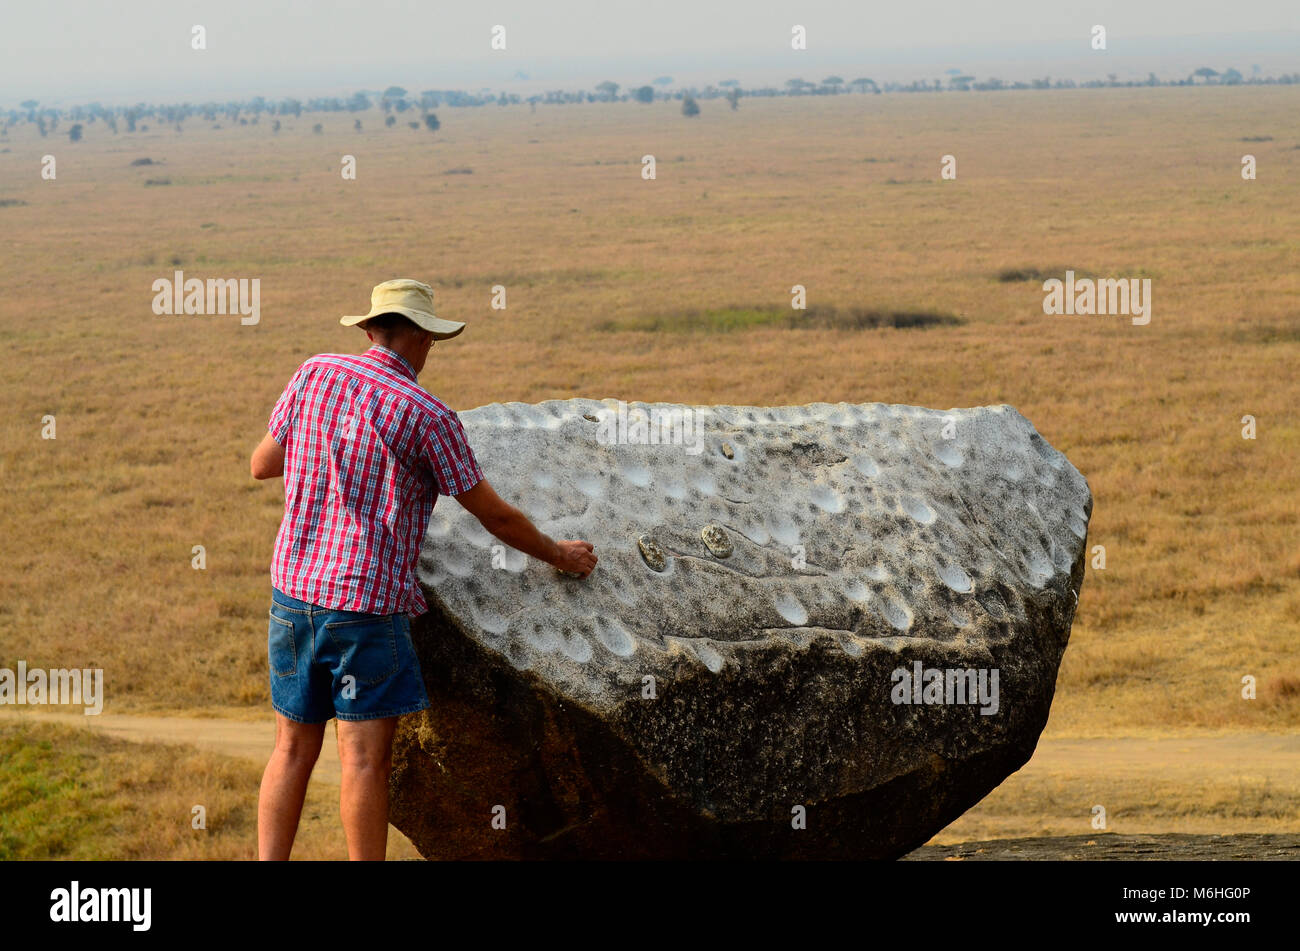 Serengeti National Park in Tanzania, is one of the most spectacular wildlife destinations on earth. Tourist banging rock on gong rock. Stock Photo